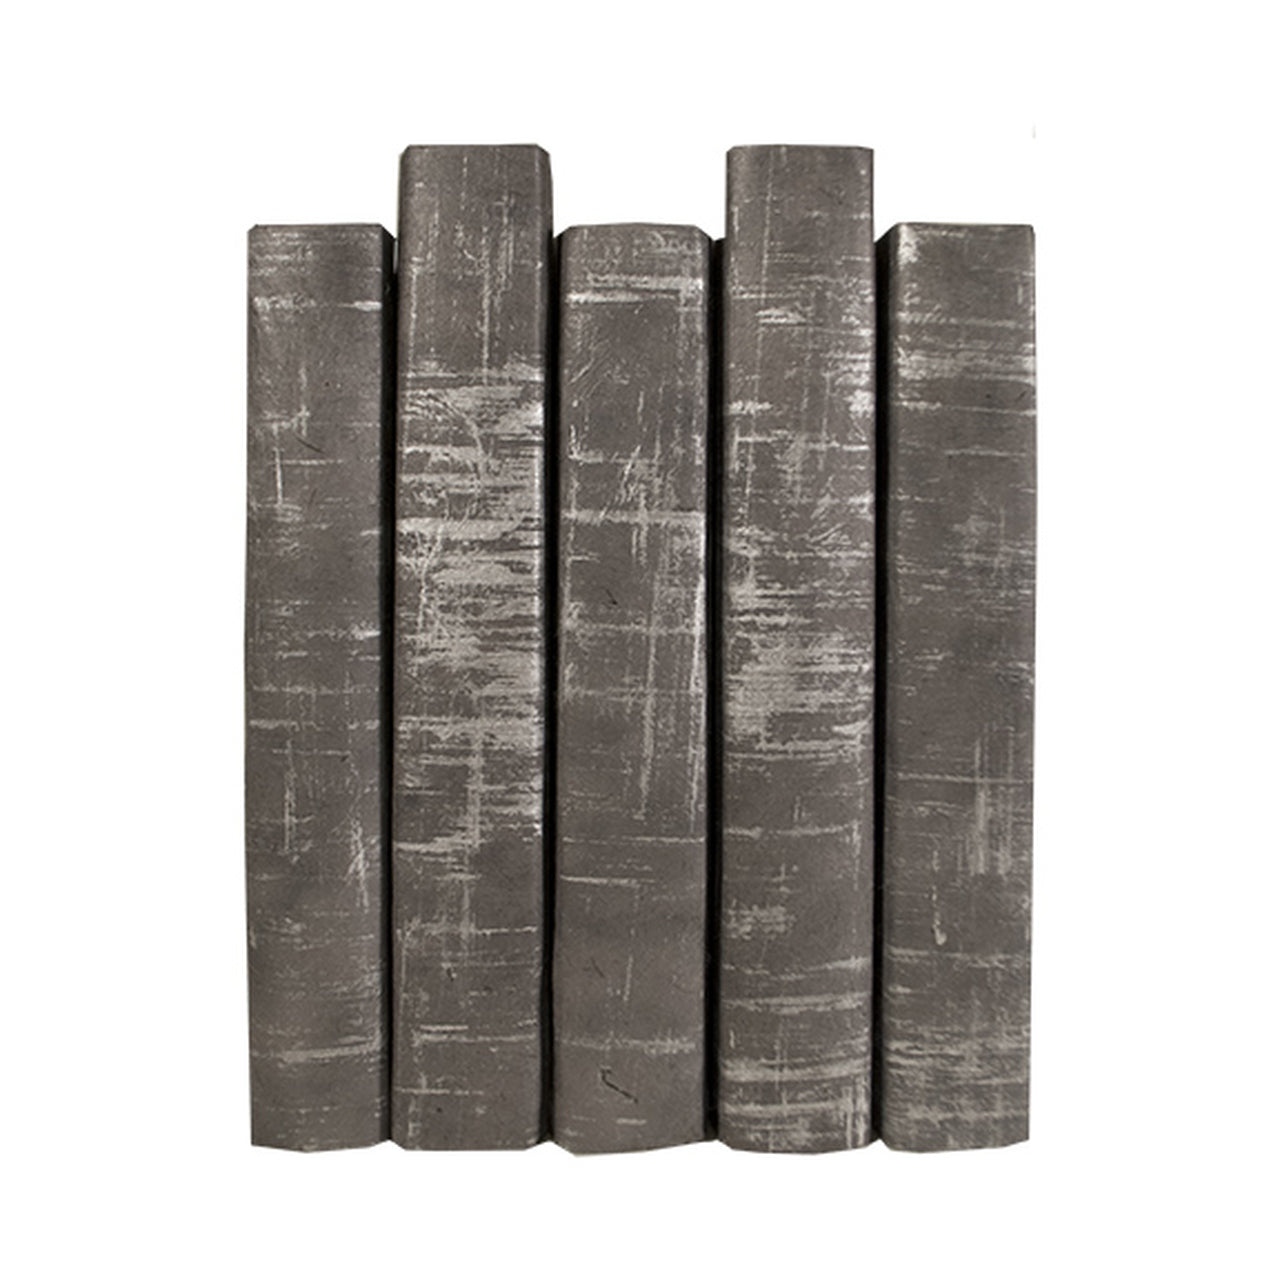 e lawrence brushed gray book set of 5